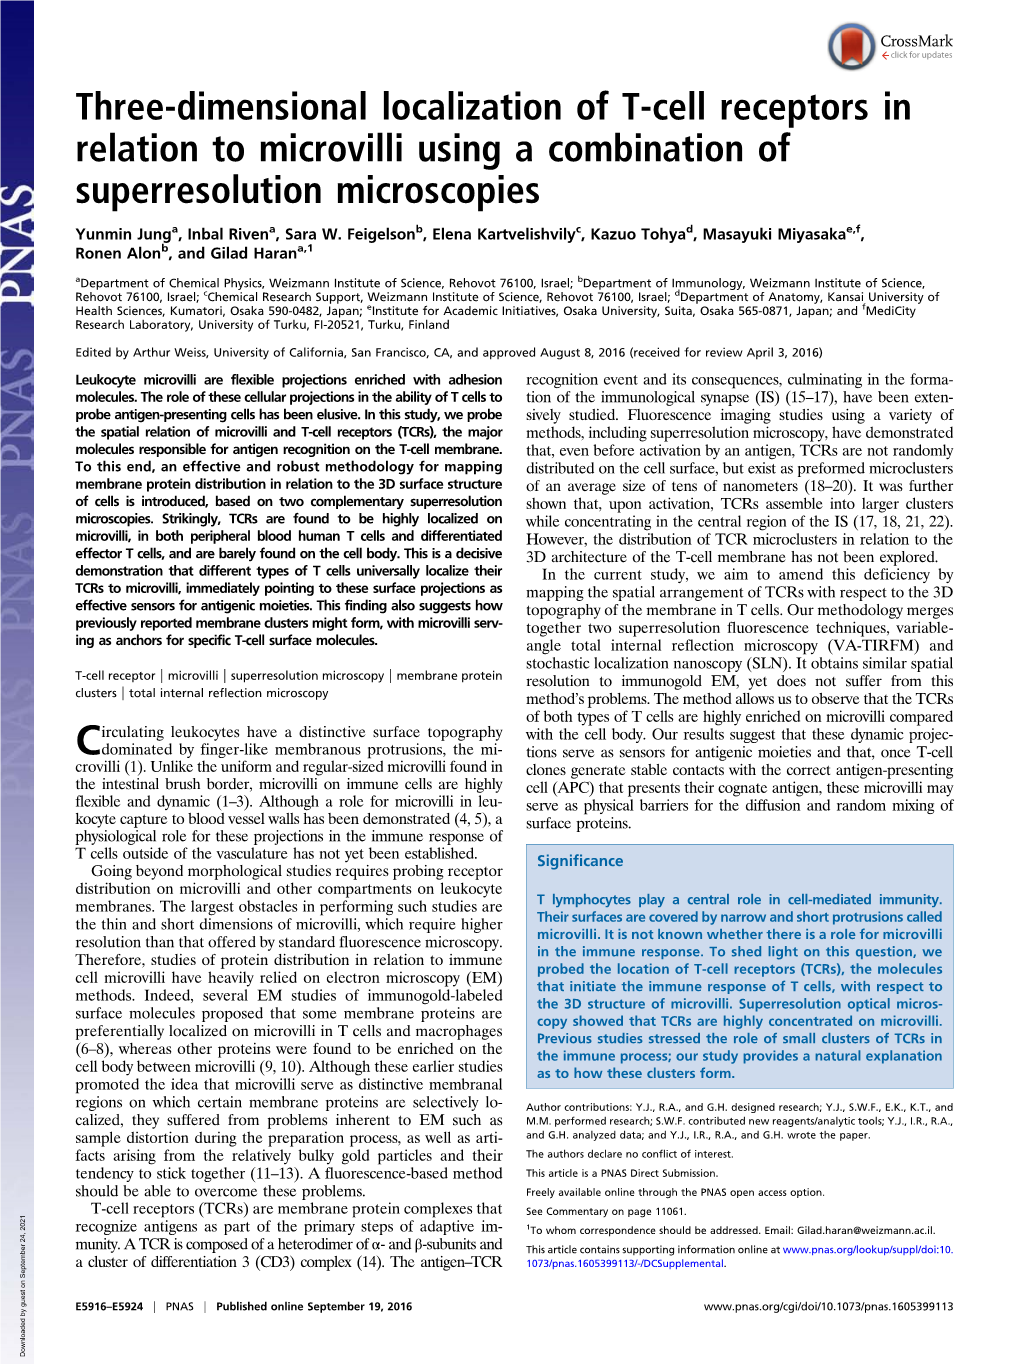 Three-Dimensional Localization of T-Cell Receptors in Relation to Microvilli Using a Combination of Superresolution Microscopies